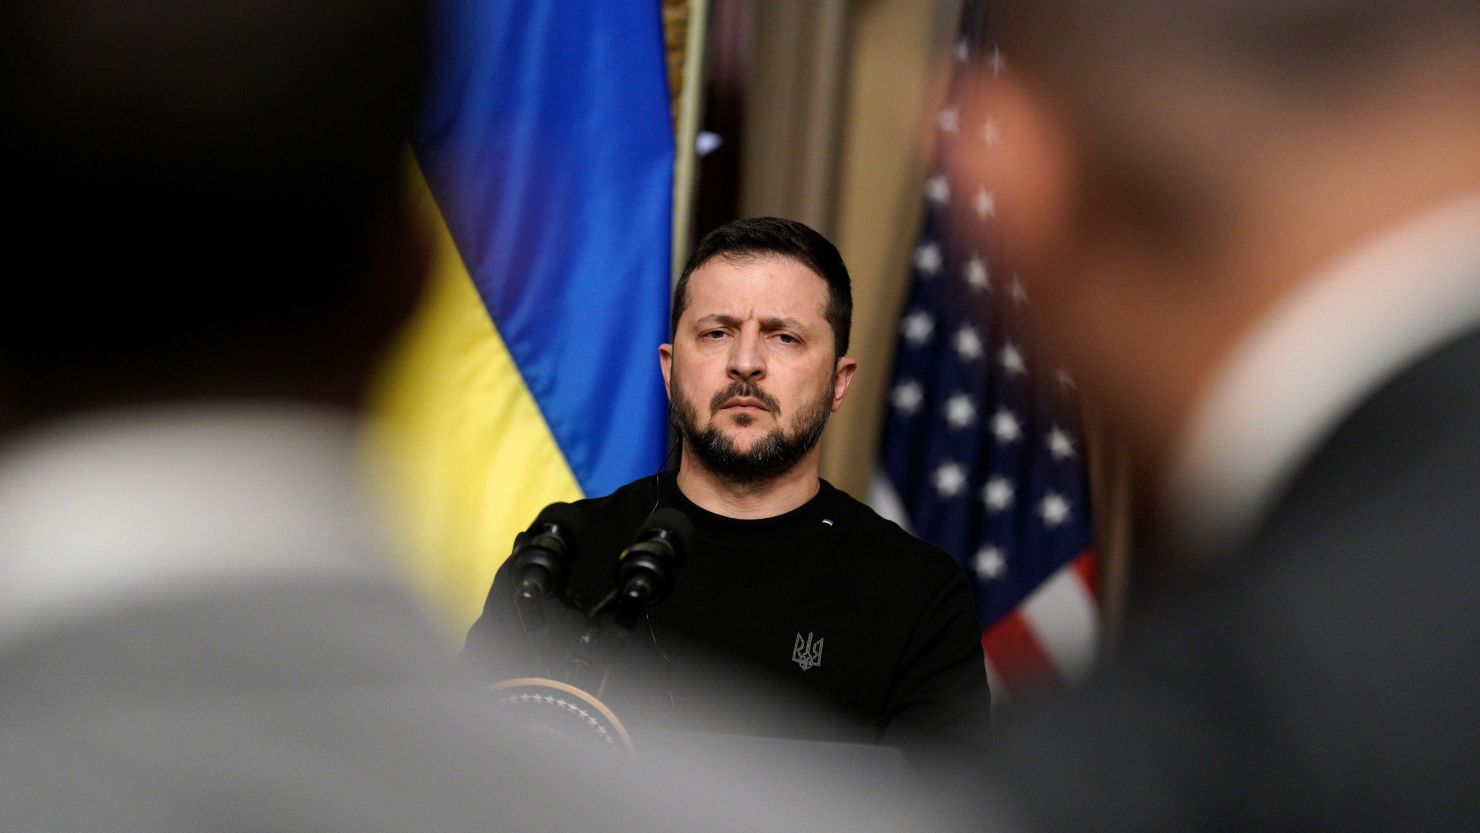 Mandatory Credit: Photo by Yuri Gripas/UPI/Shutterstock (14255310i)
Ukrainian President Volodymyr Zelensky is seen during a joint press conference with US President Joe Biden after their meeting at the White House in Washington, DC on Tuesday, December 12, 2023.
USA-Ukraine press conefdrence in Washington, District of Columbia, United States - 12 Dec 2023